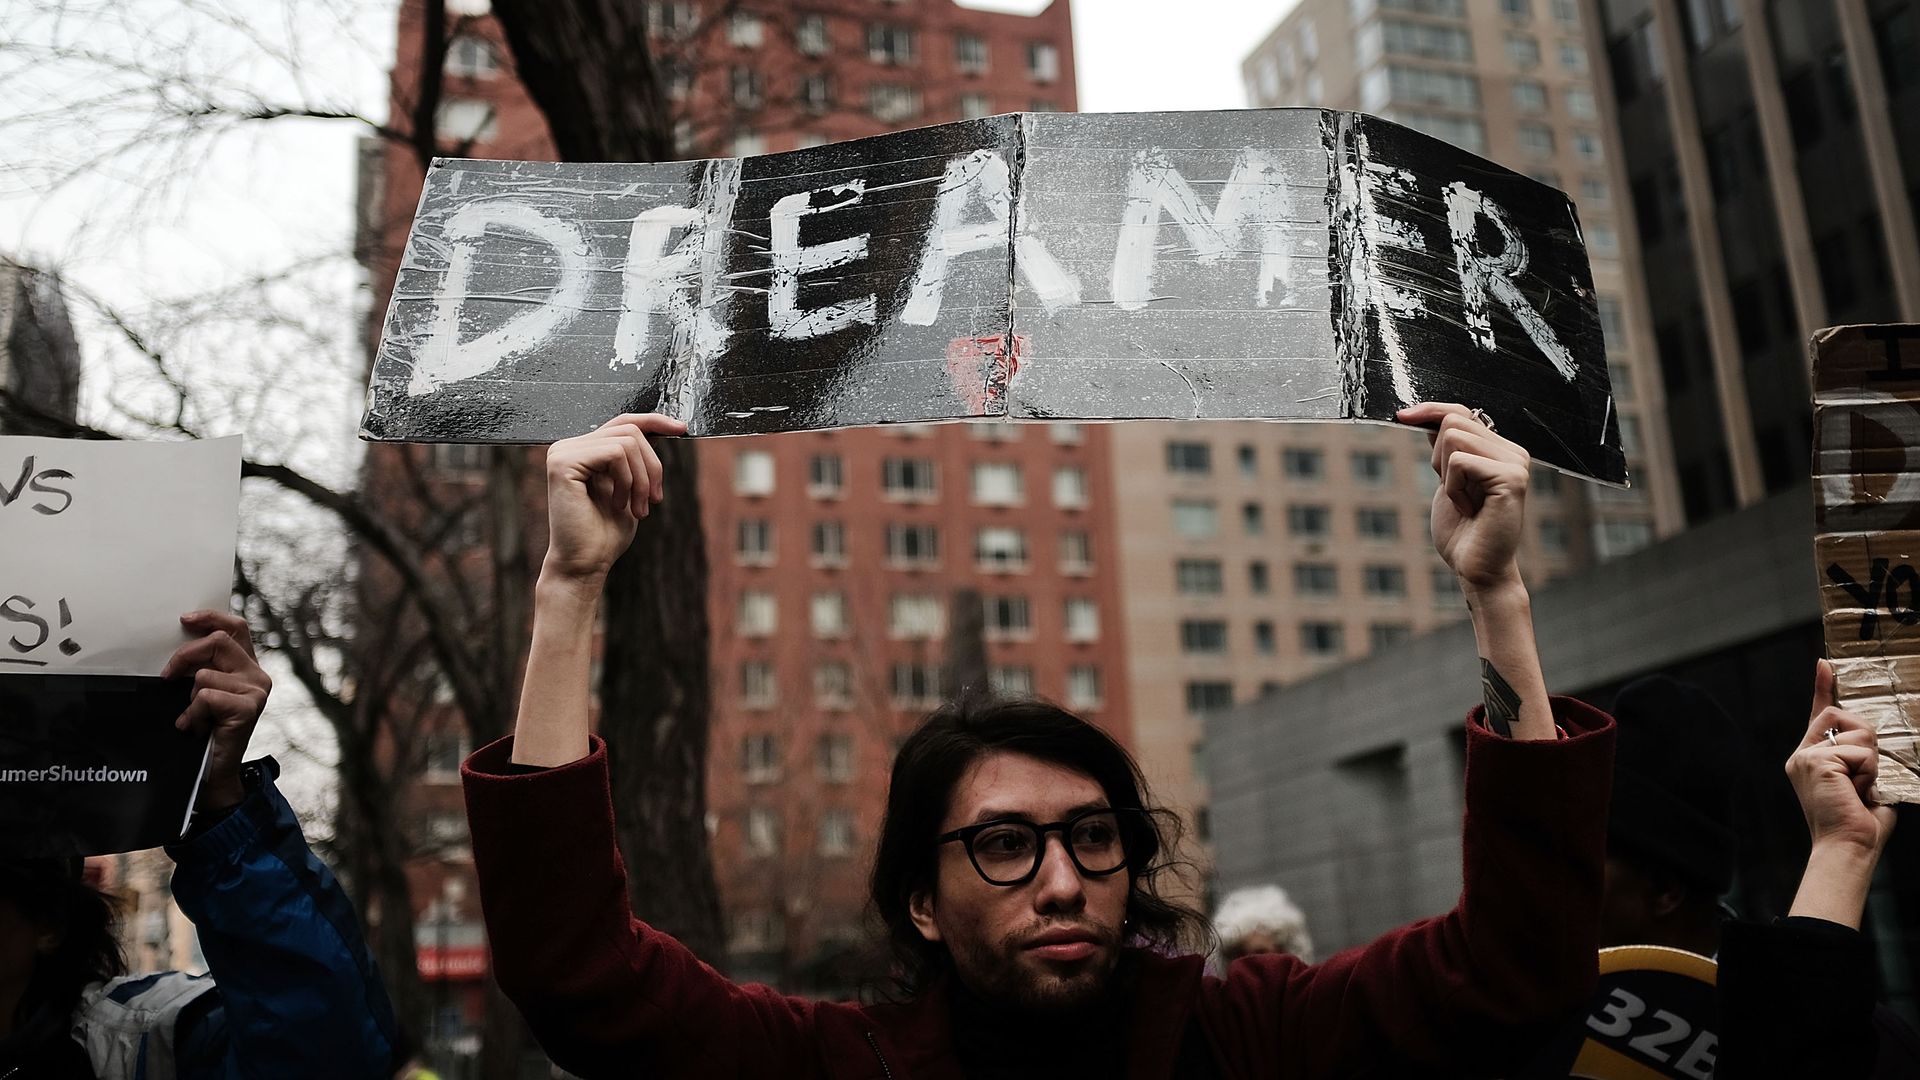 A demonstrator protests, holding a sign that says "DREAMER." 